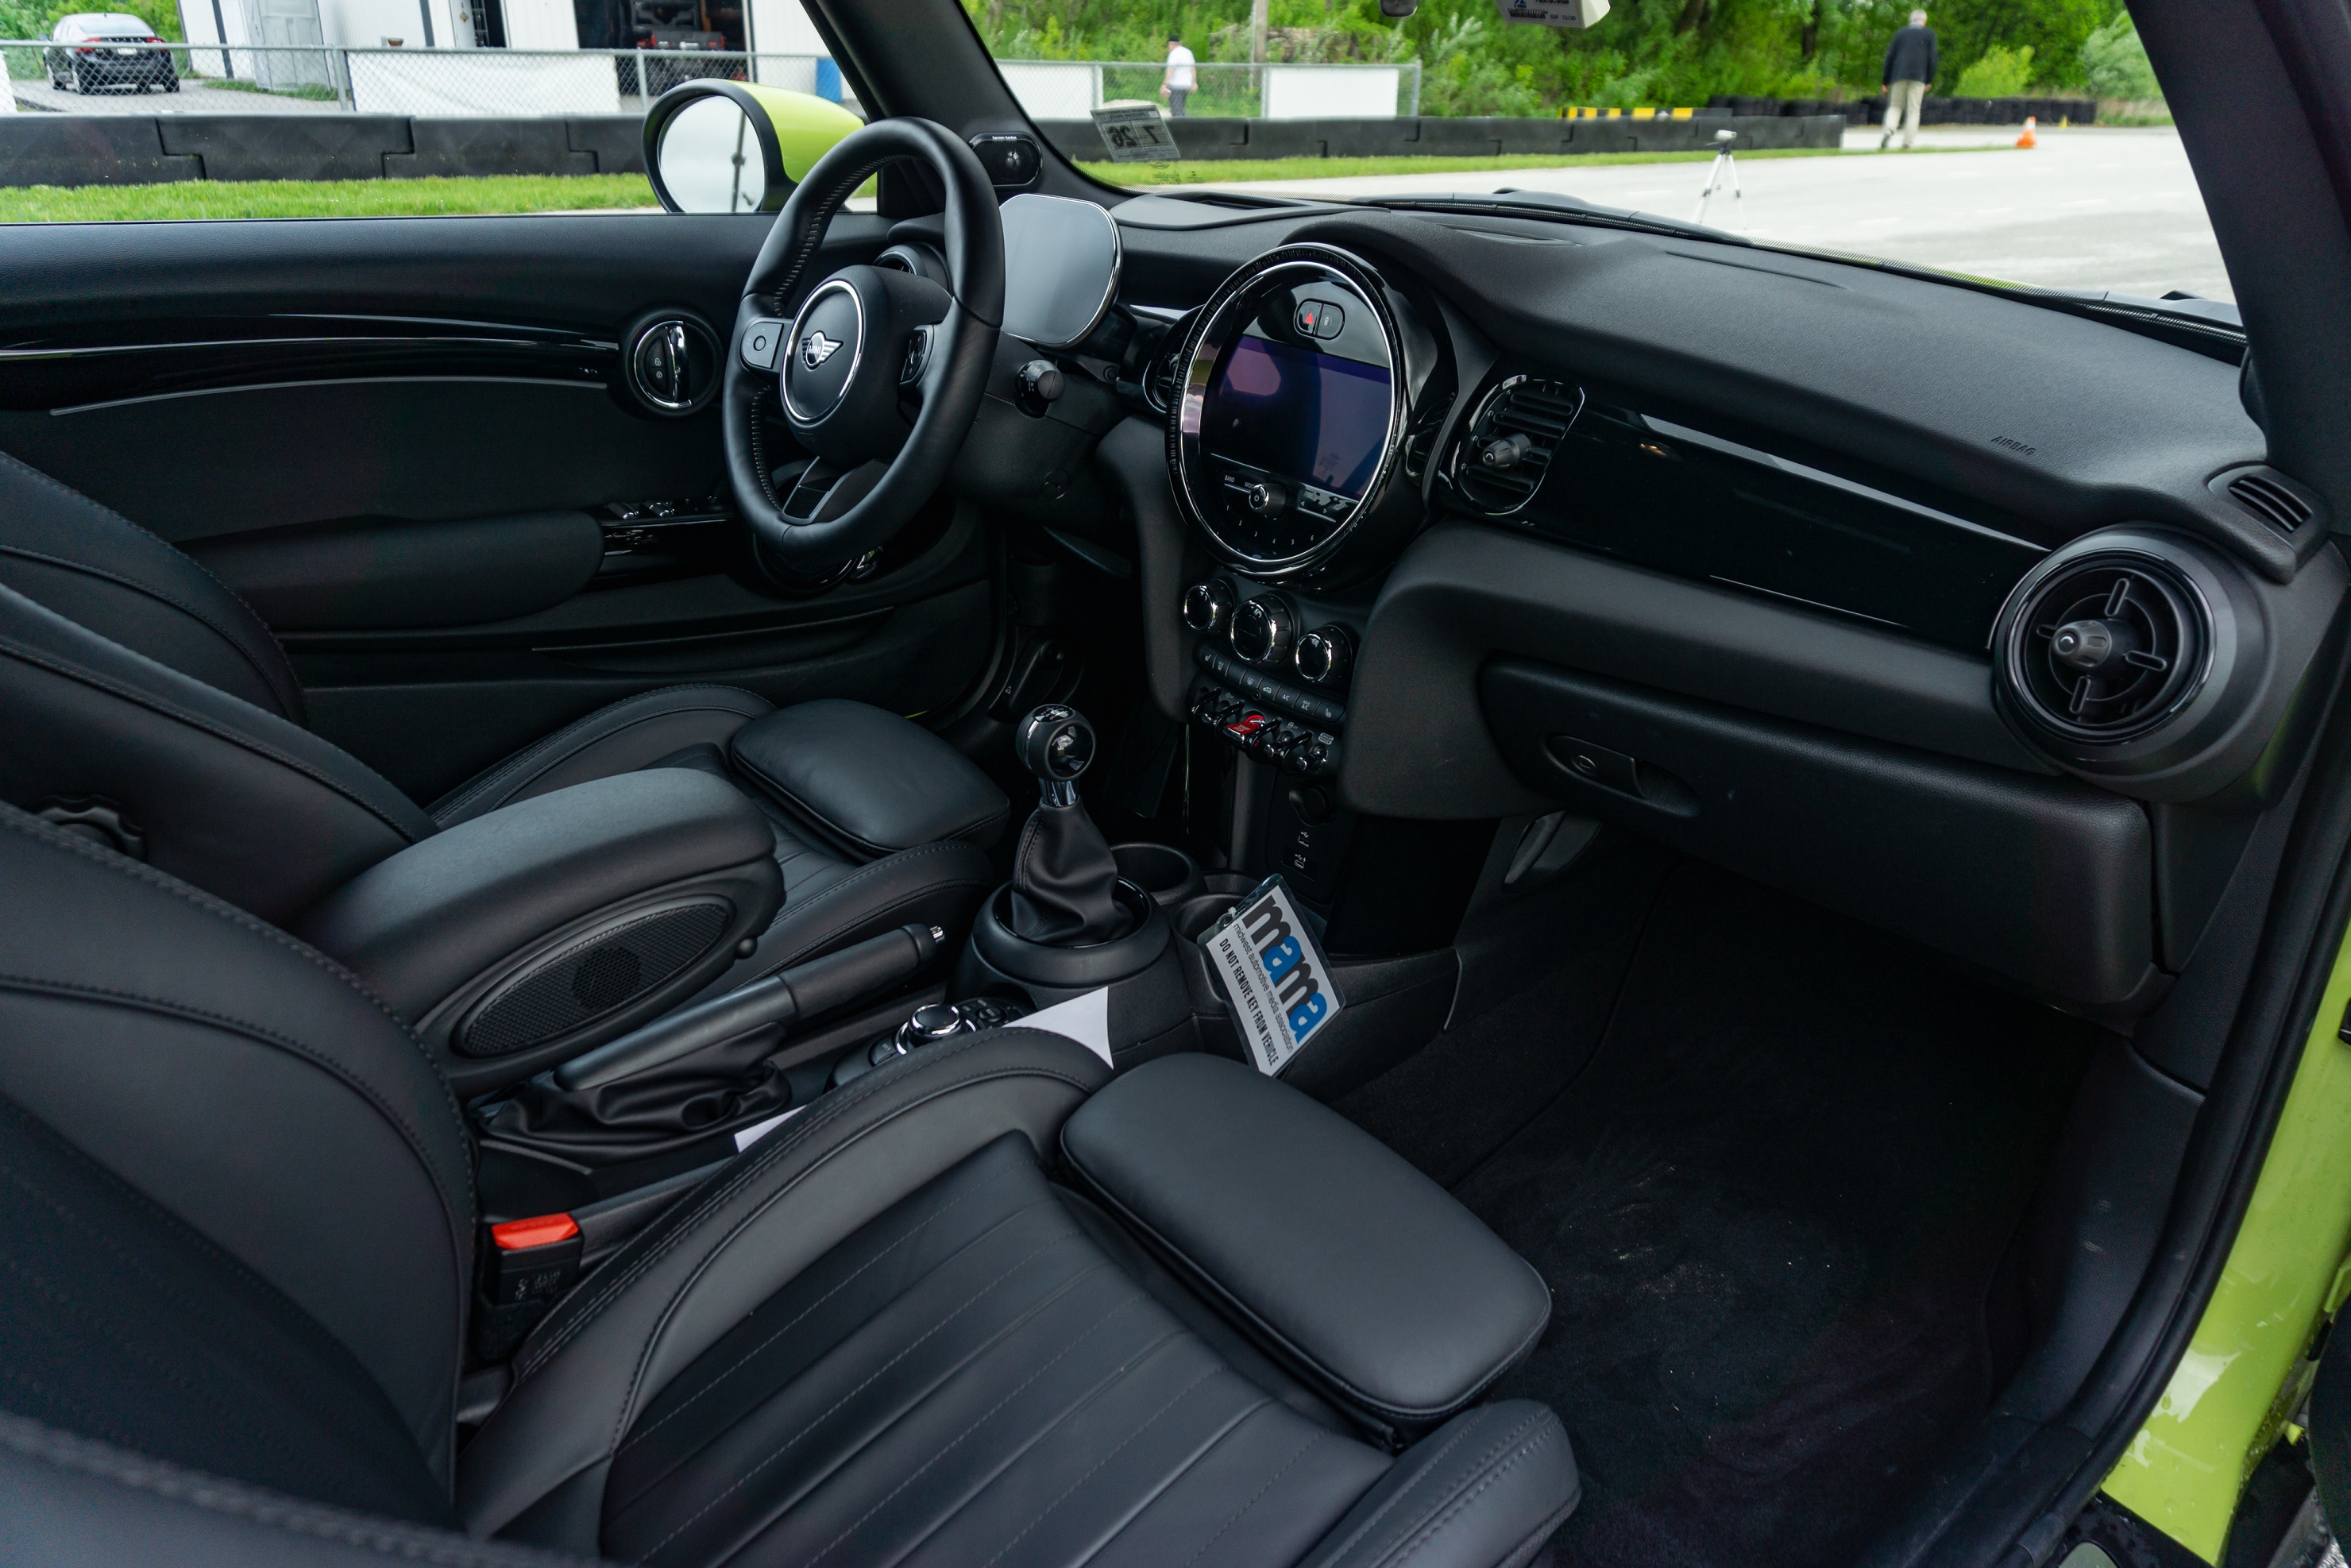 The black front seats and dashboard of a 2022 Mini Cooper S Convertible